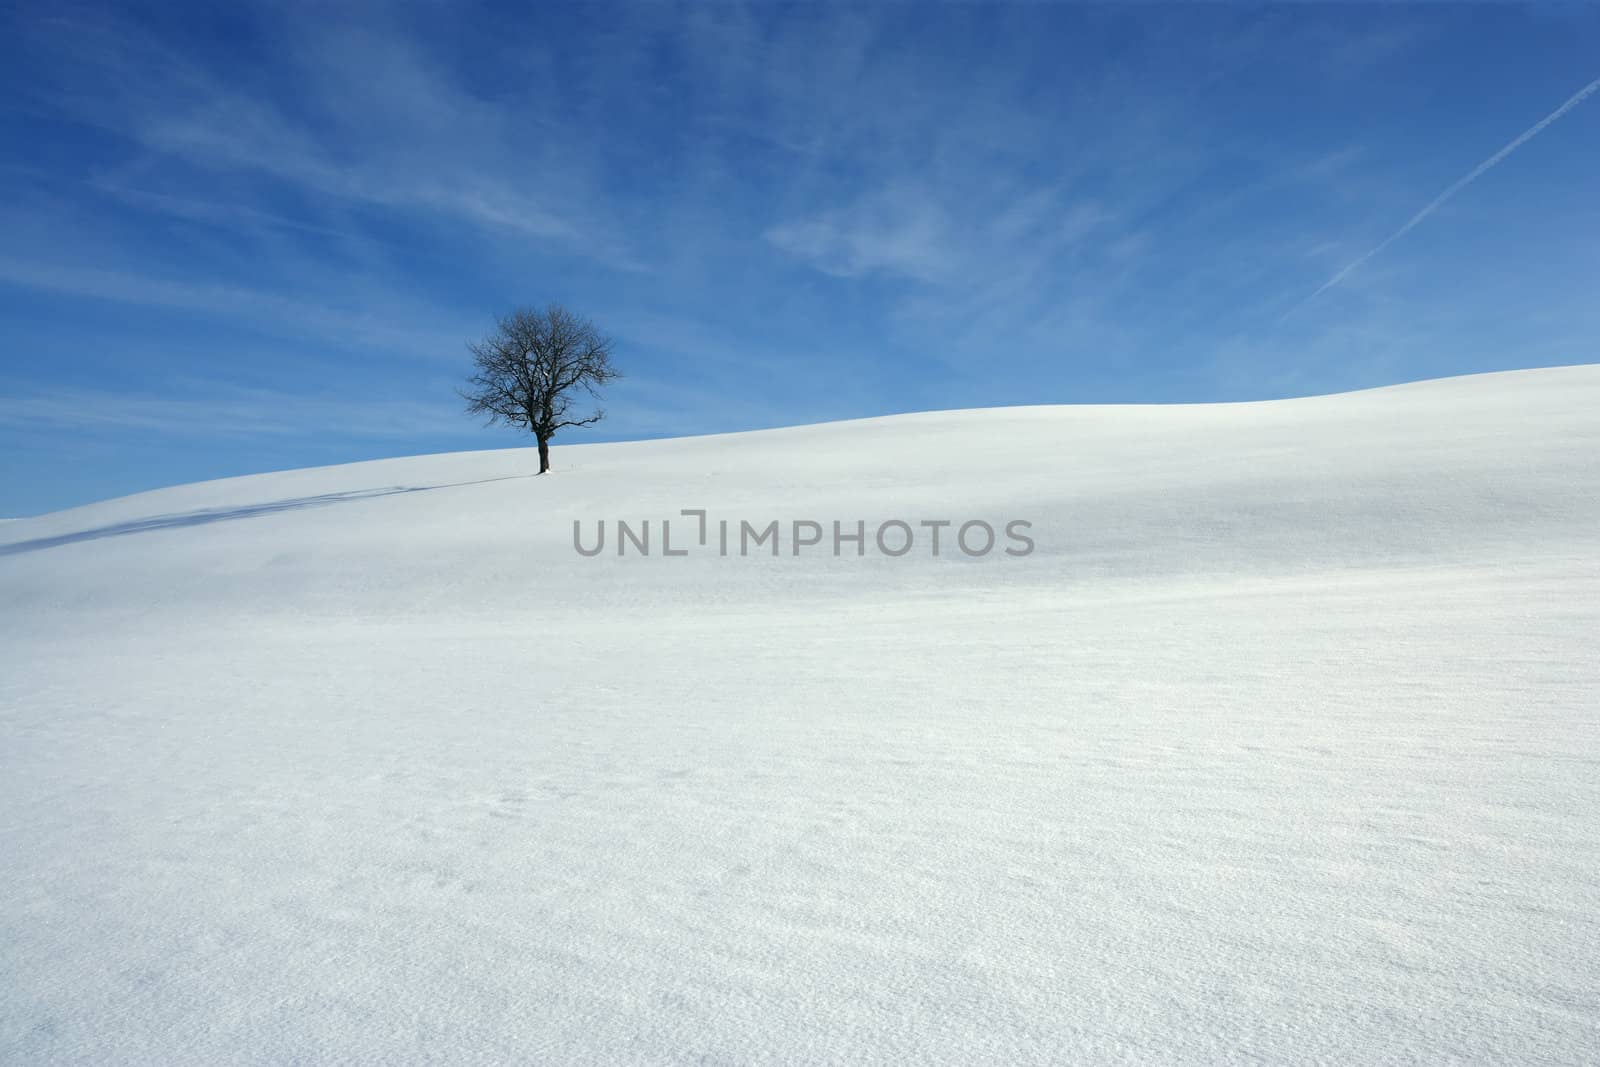 Landscape image of a snowy meadow with one tree.
